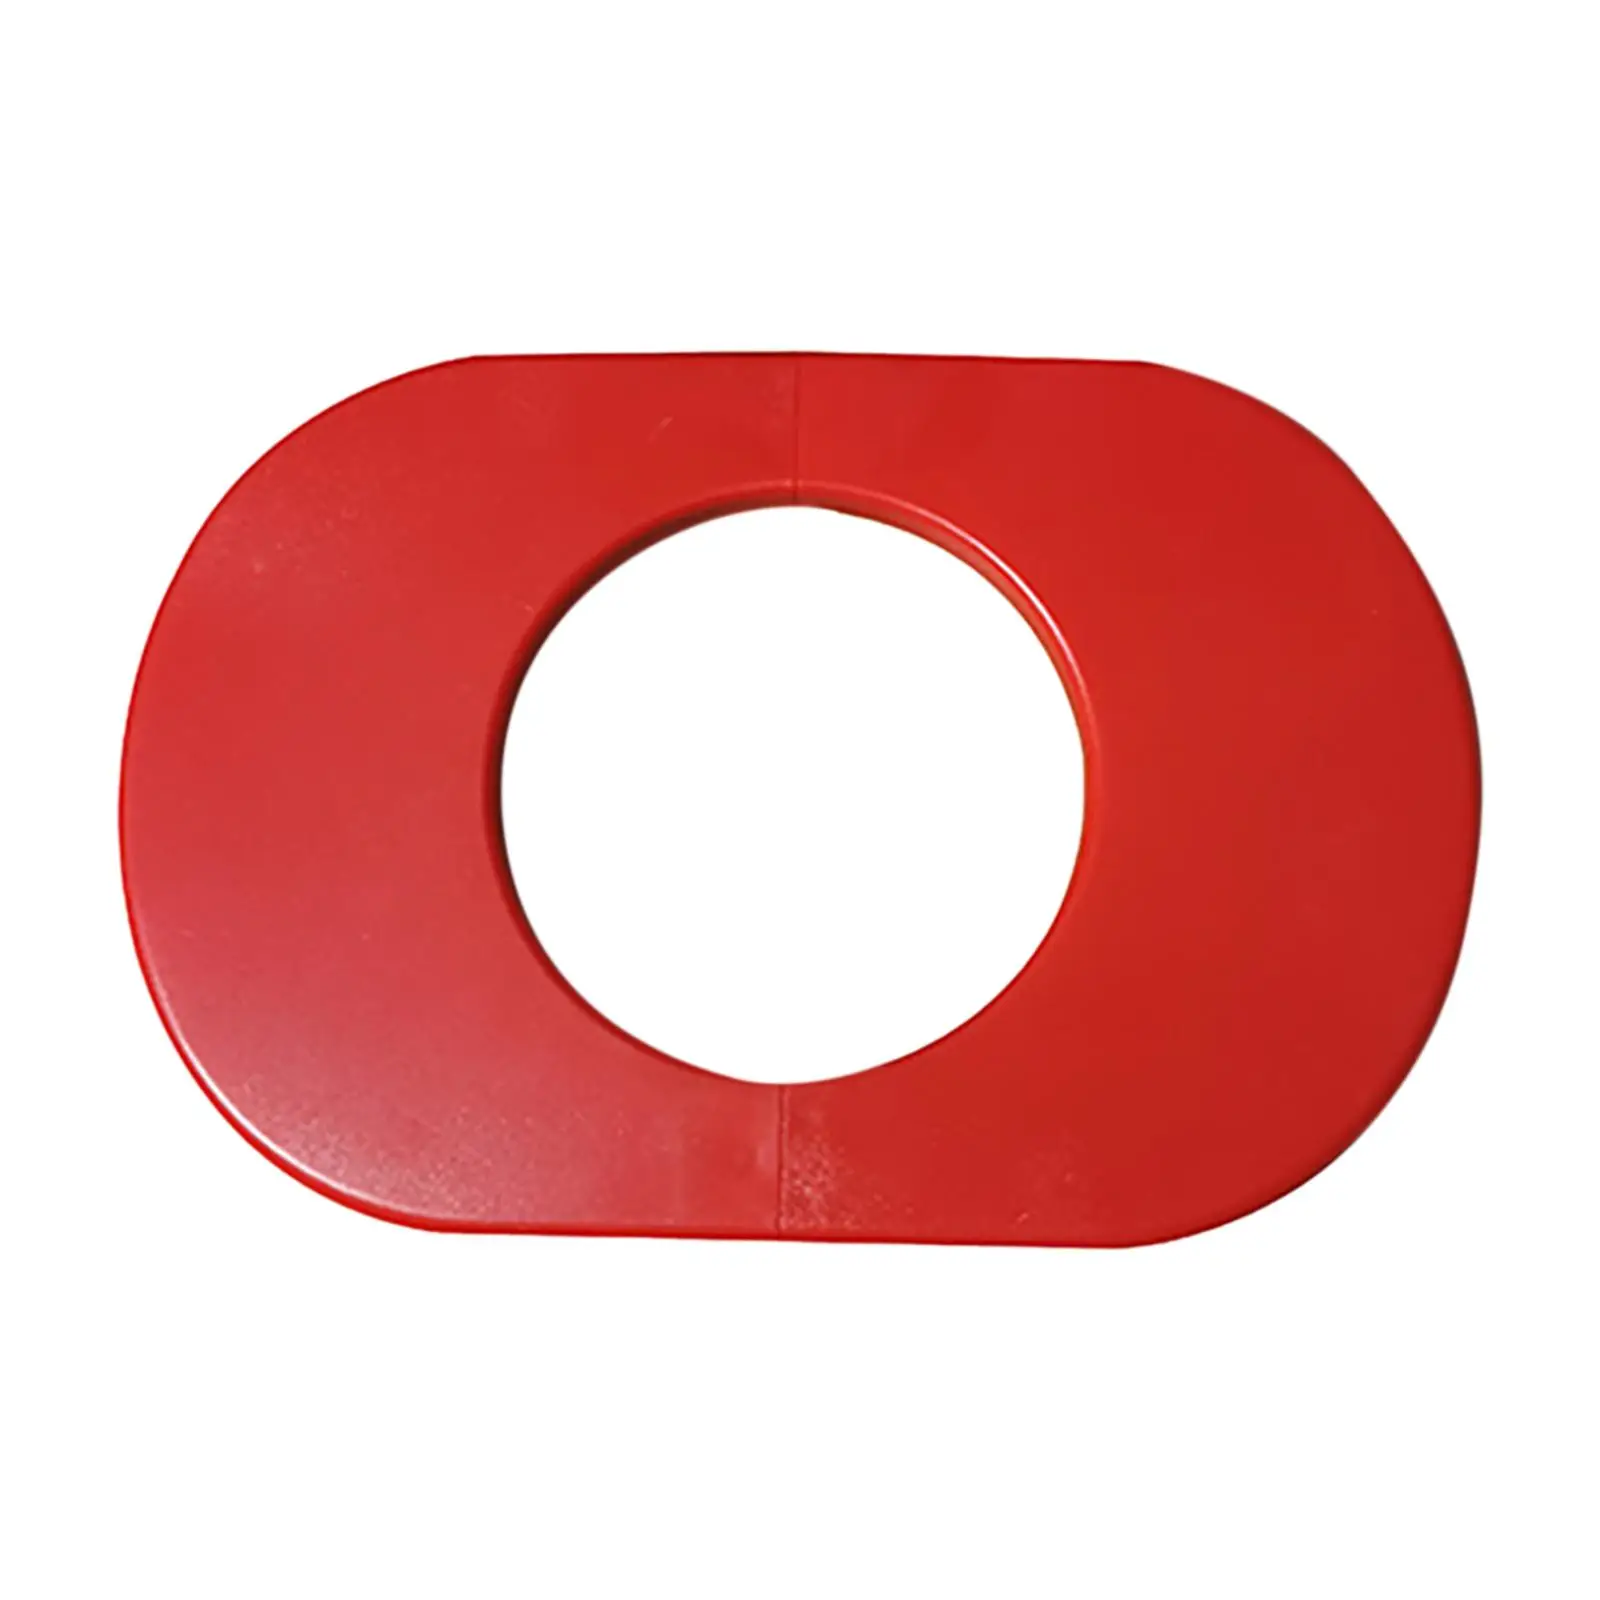 Decoration Cover Fittings Portable Split Type Fire Department Cap for Construction Maintenance Fire Pipes Home Improvement